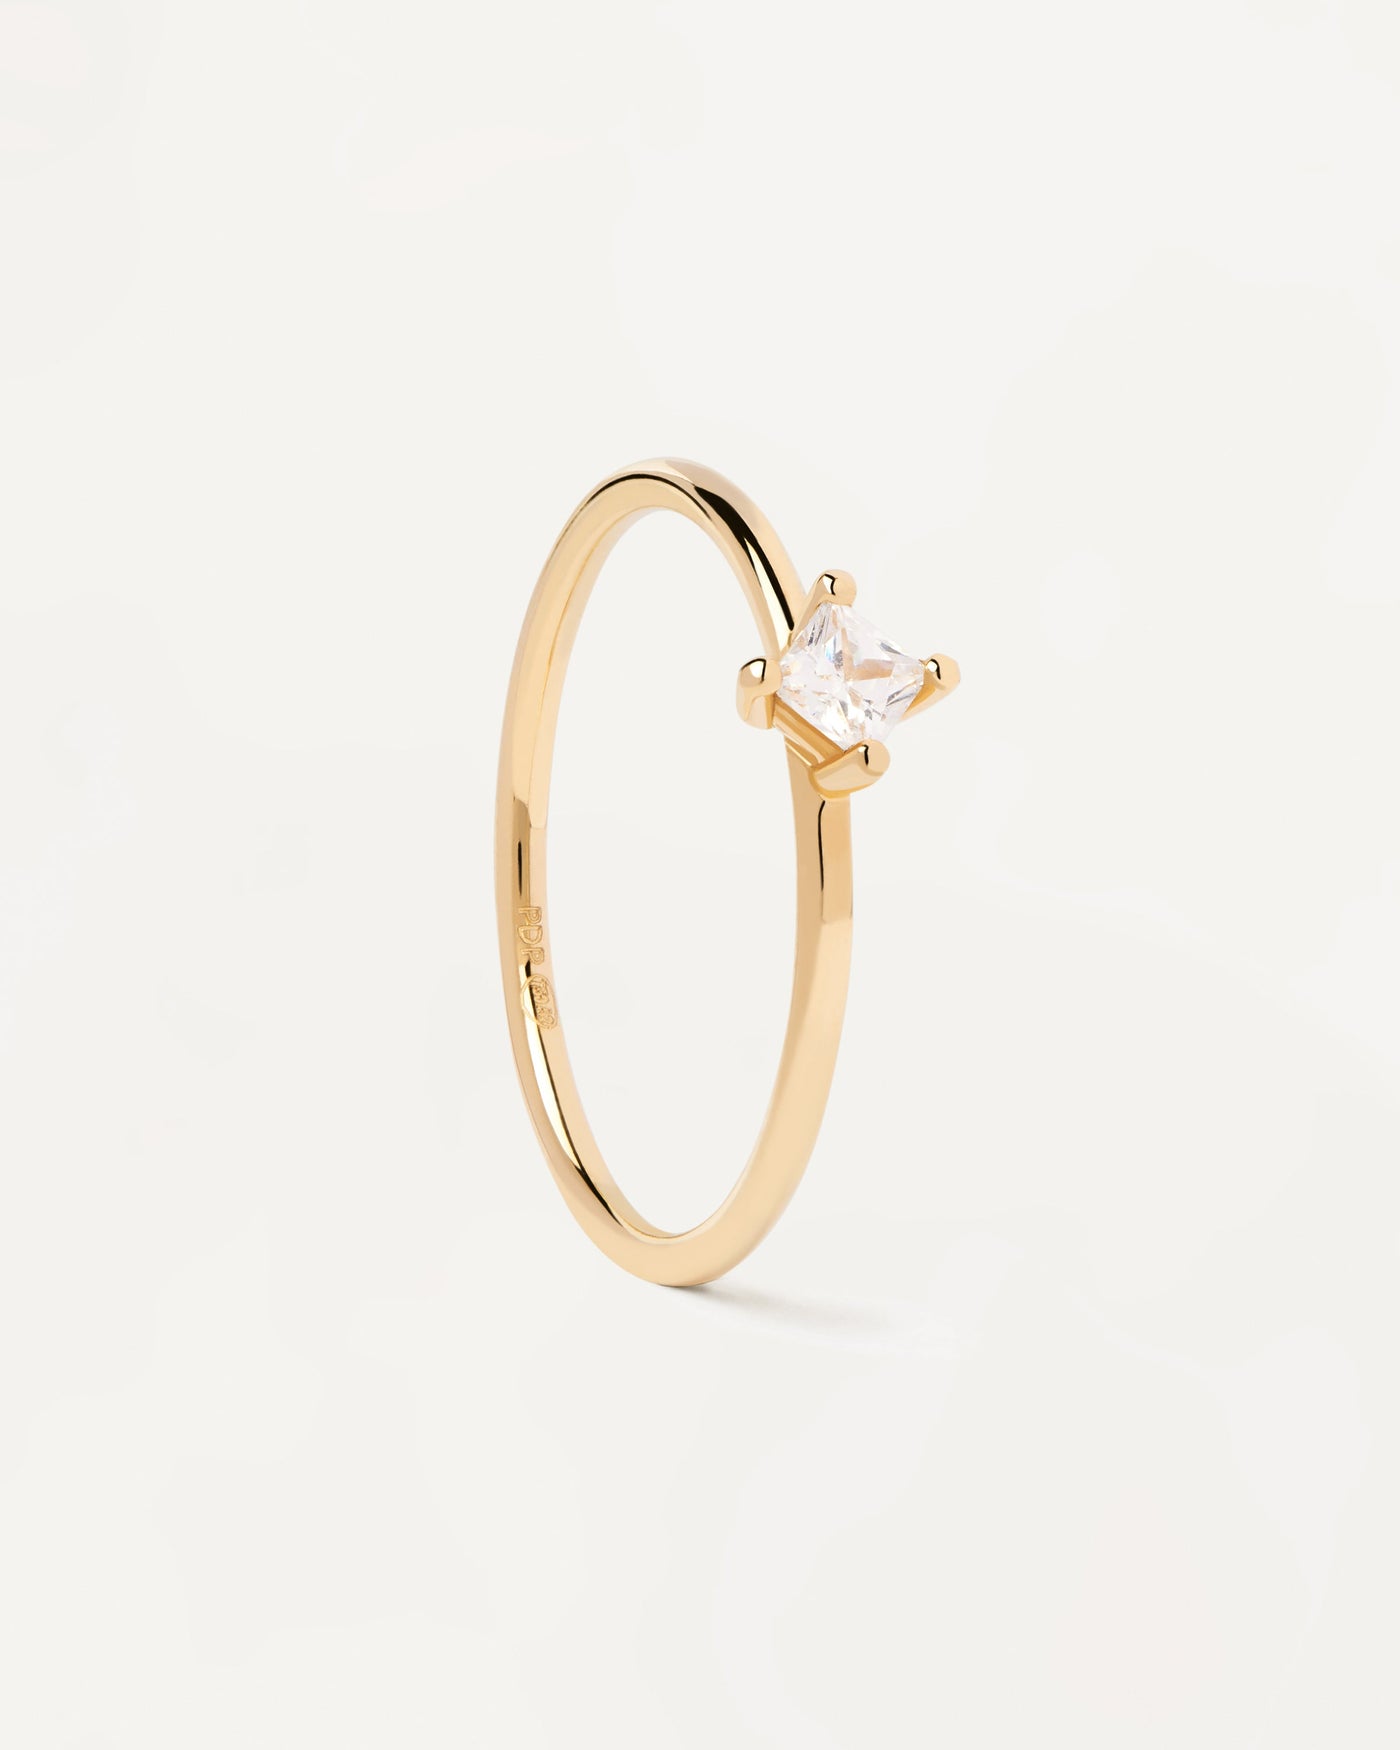 2023 Selection | Square Diamond and gold Solitaire Ring. Solid yellow gold ring with squared princess diamond lab-grown of 0.17 carat. Get the latest arrival from PDPAOLA. Place your order safely and get this Best Seller. Free Shipping.